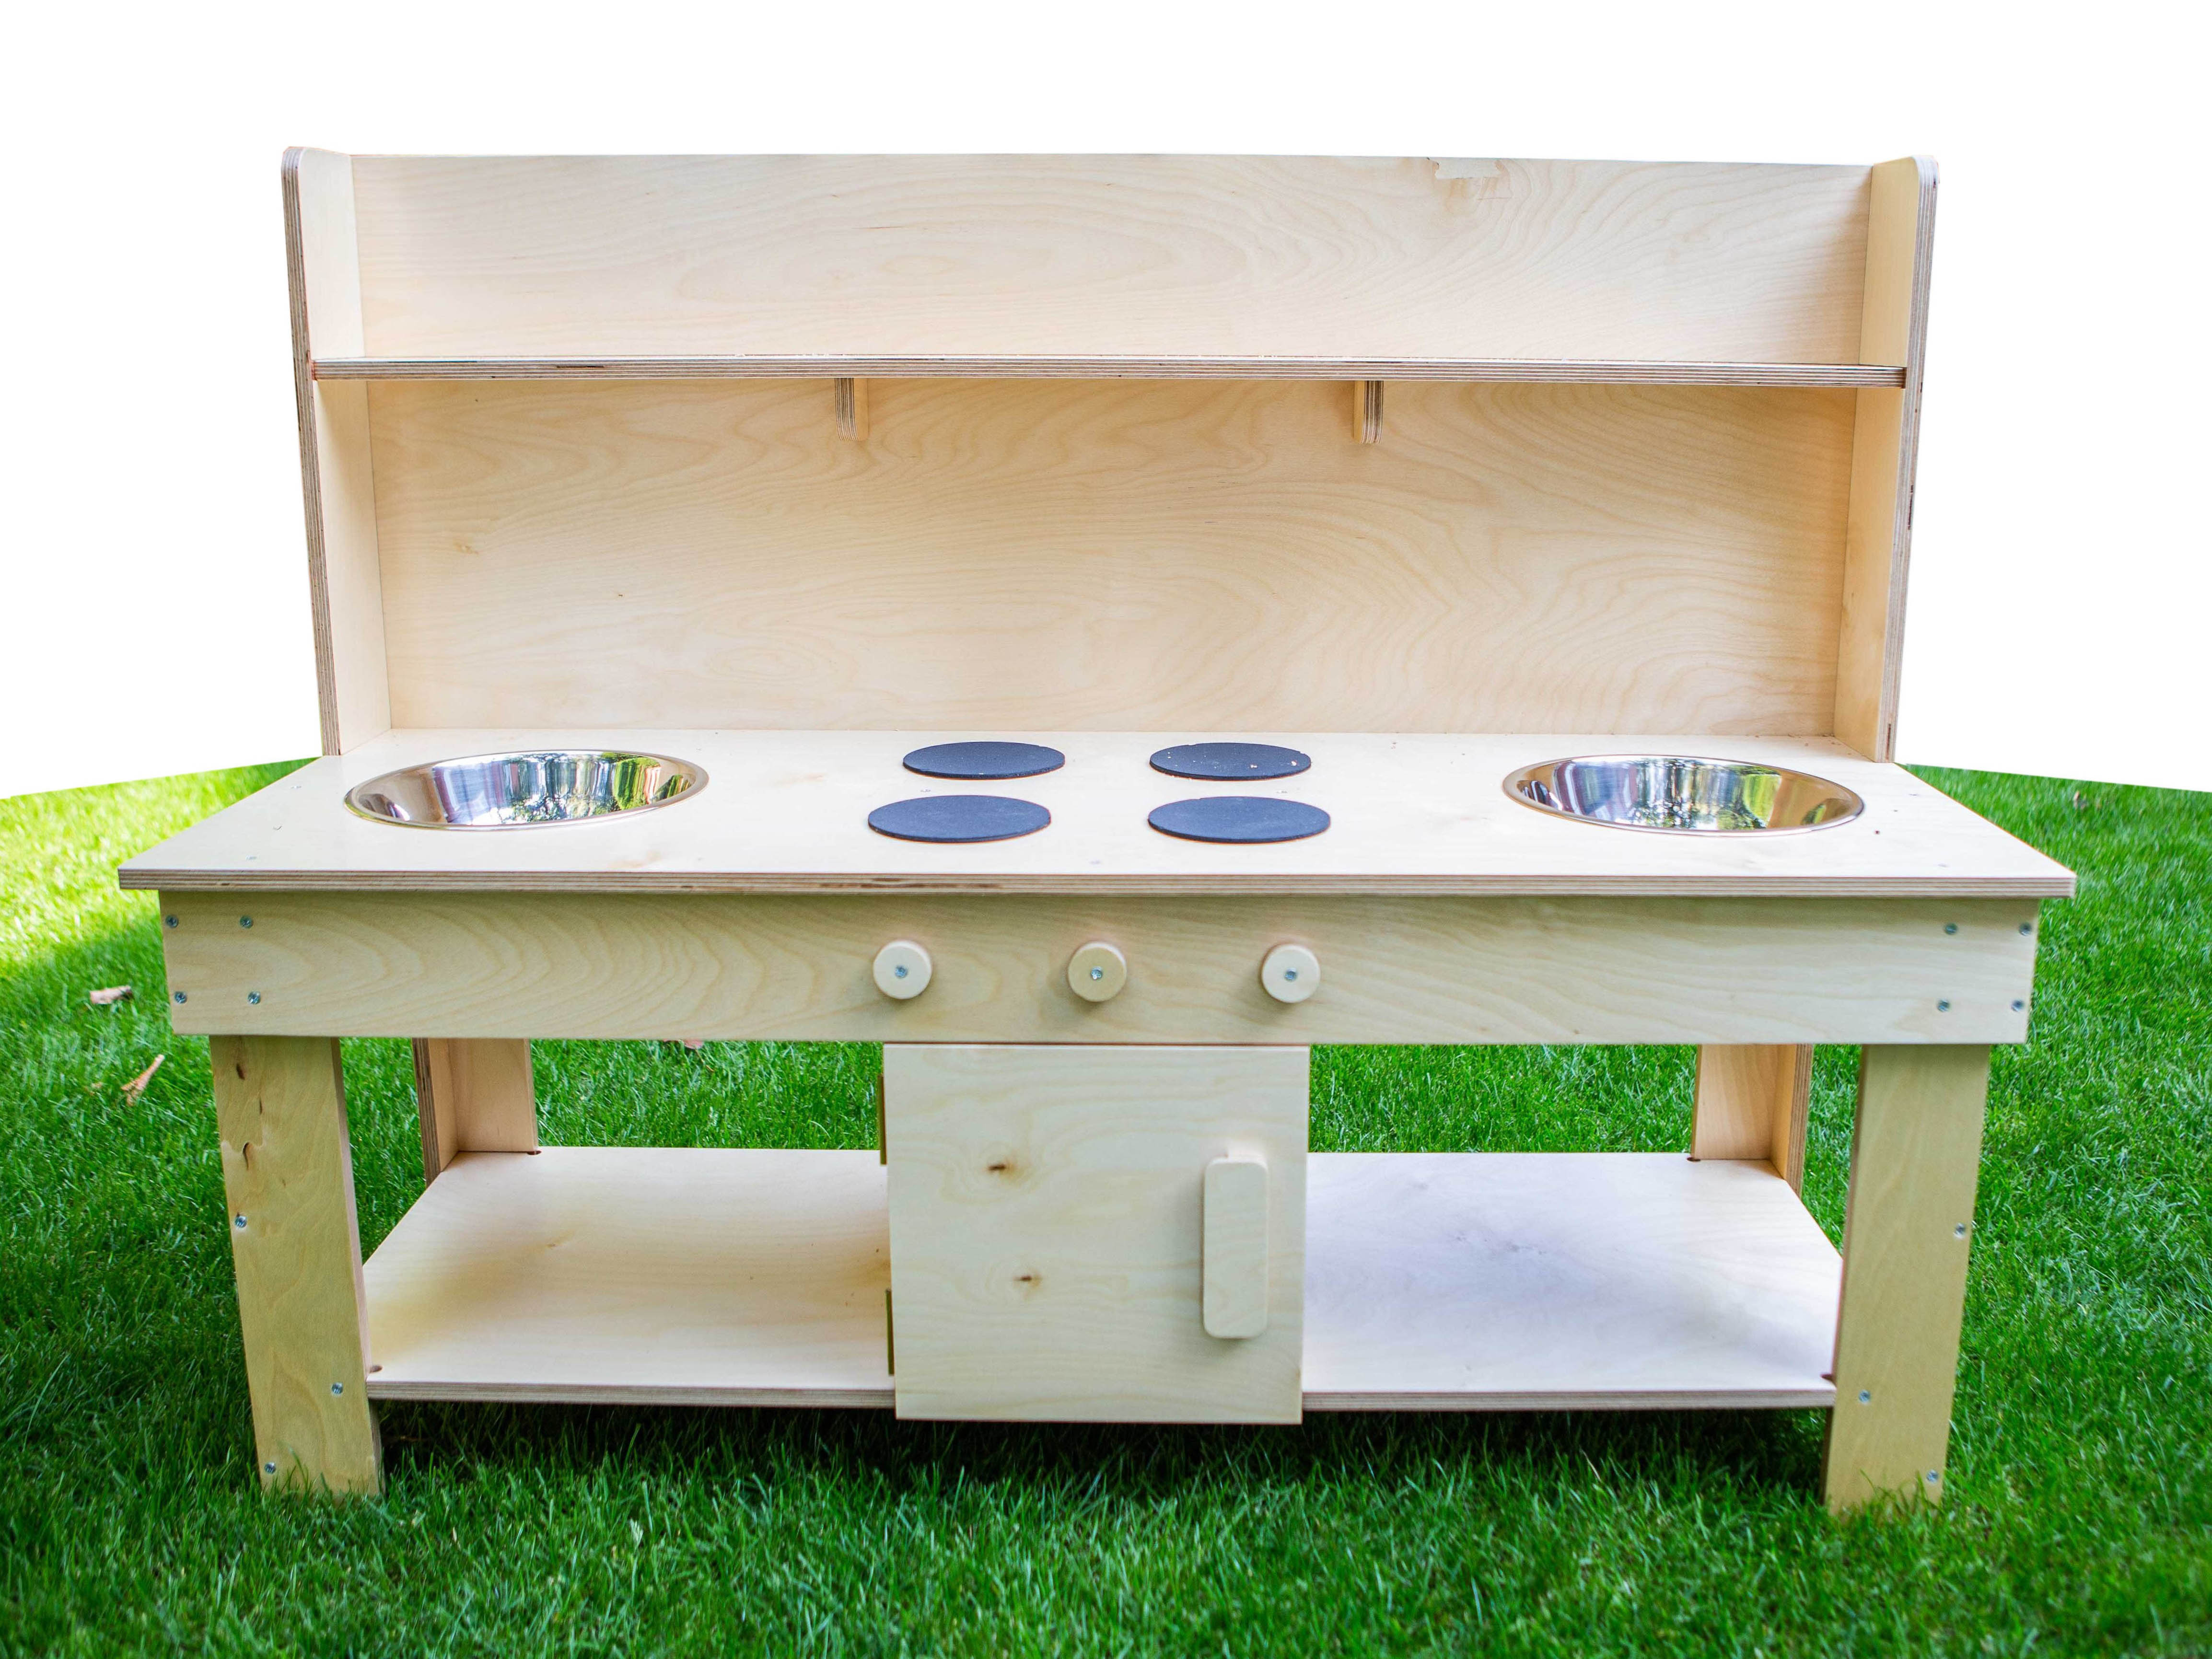 Little Bugs Co mud kitchen with two bowls.jpg